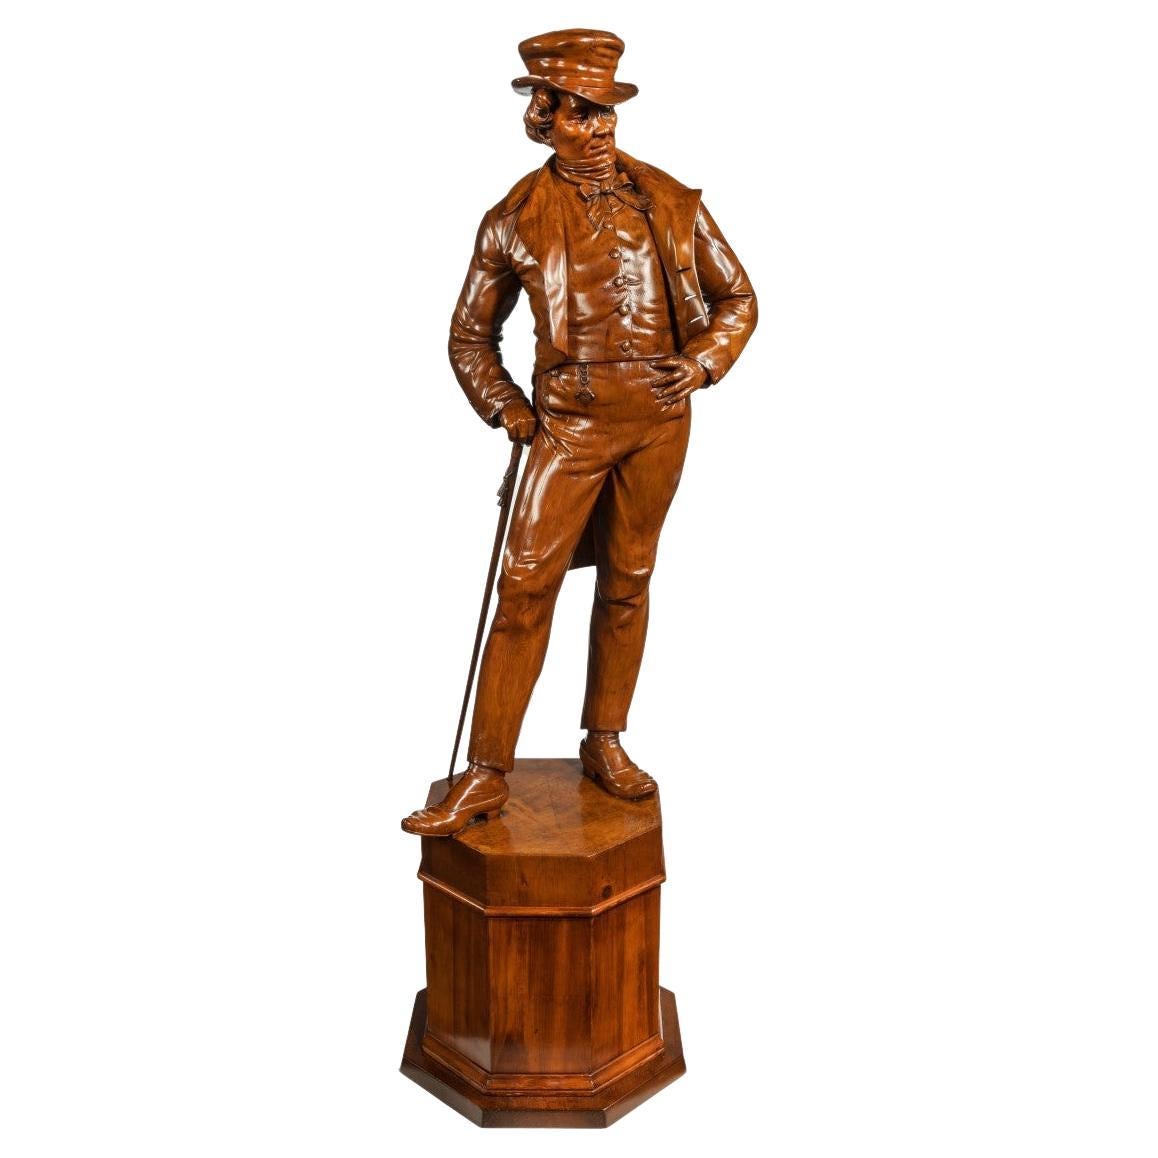 Victorian carved walnut figure of Mark Tapley from the novel by Charles Dickens